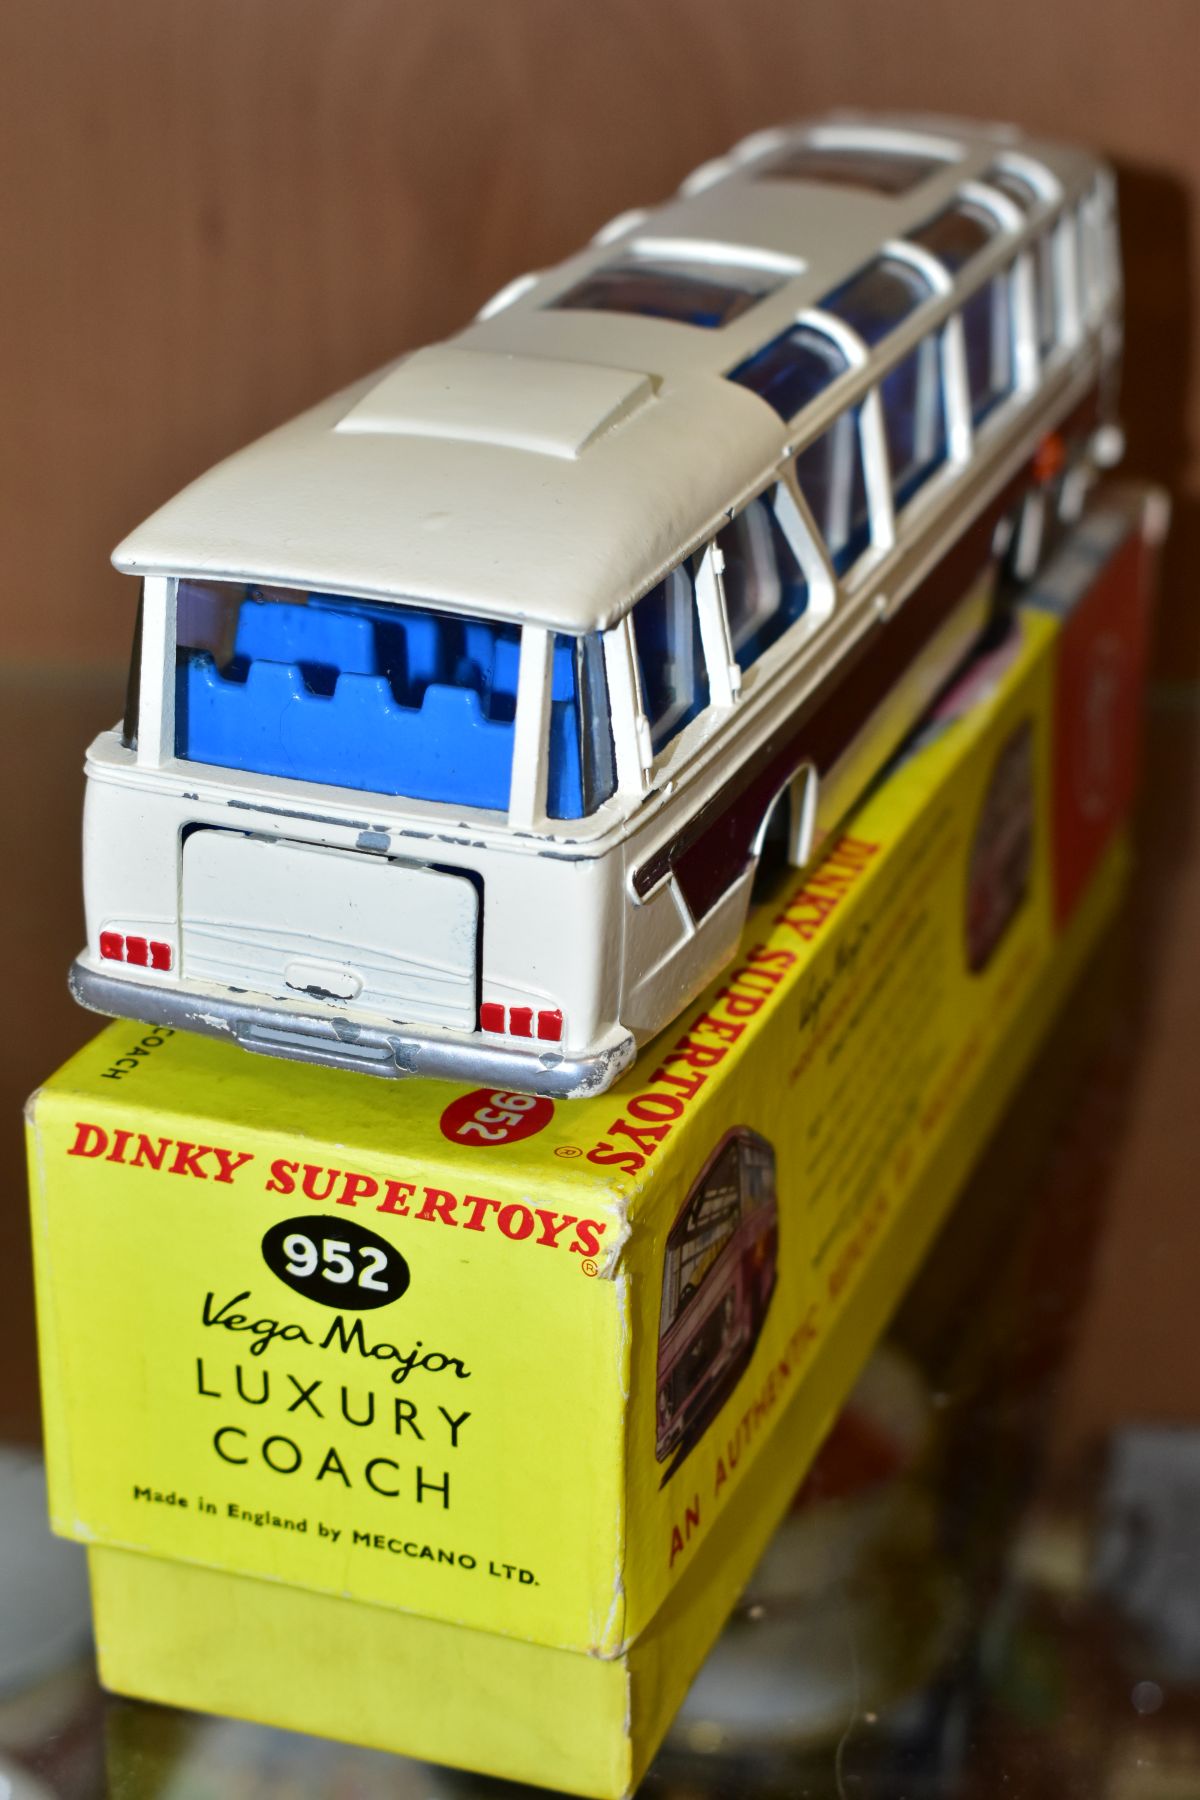 A BOXED DINKY SUPERTOYS BEDFORD VAN DUPLE VEGA MAJOR LUXURY COACH, No. 952, version with flashing - Image 4 of 7